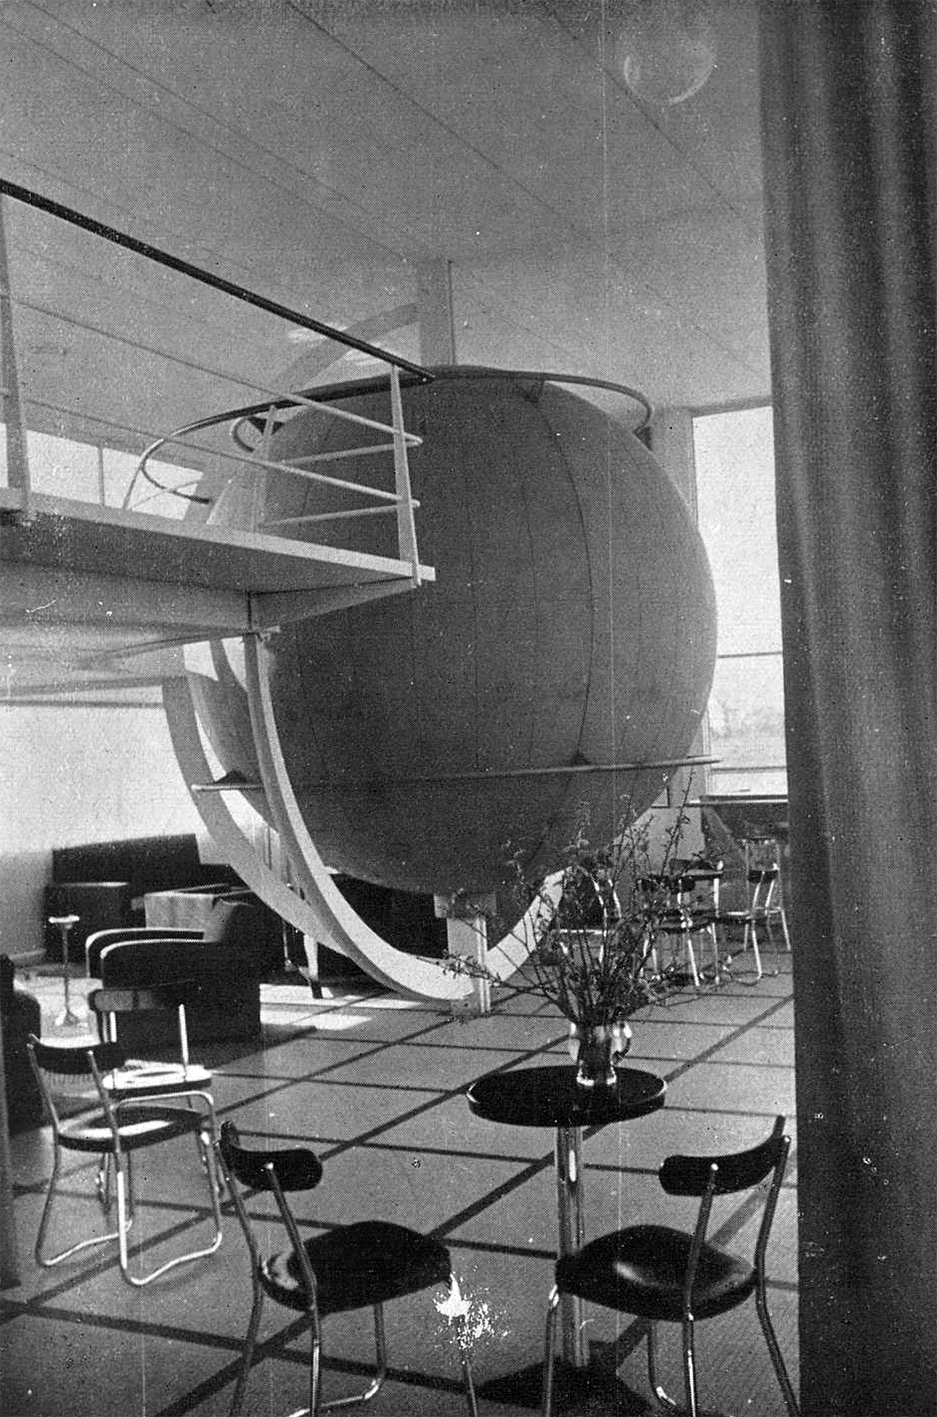 Roland Garros Flying Club, Buc, 1935 (Jean Prouvé, with architects Eugène Beaudouin and Marcel Lods) in <i>L’Architecture,</i> no. 4, April 1938. The bar and reading room.